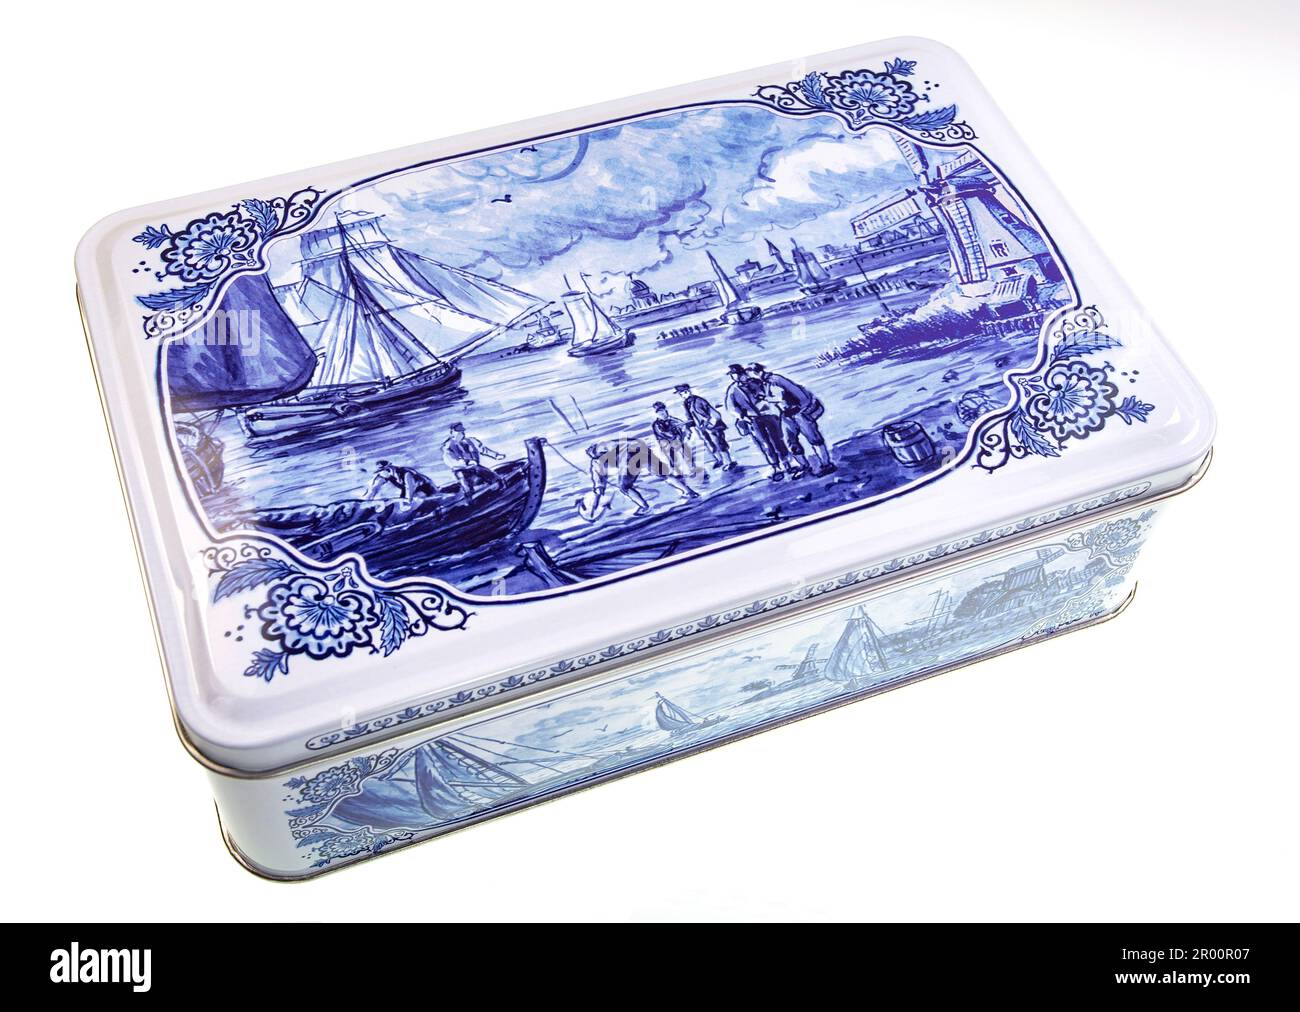 Vintage biscuit tin box with classical Dutch spiced cookies and decorated with a traditional boat and canal life scene for Hellema. Stock Photo